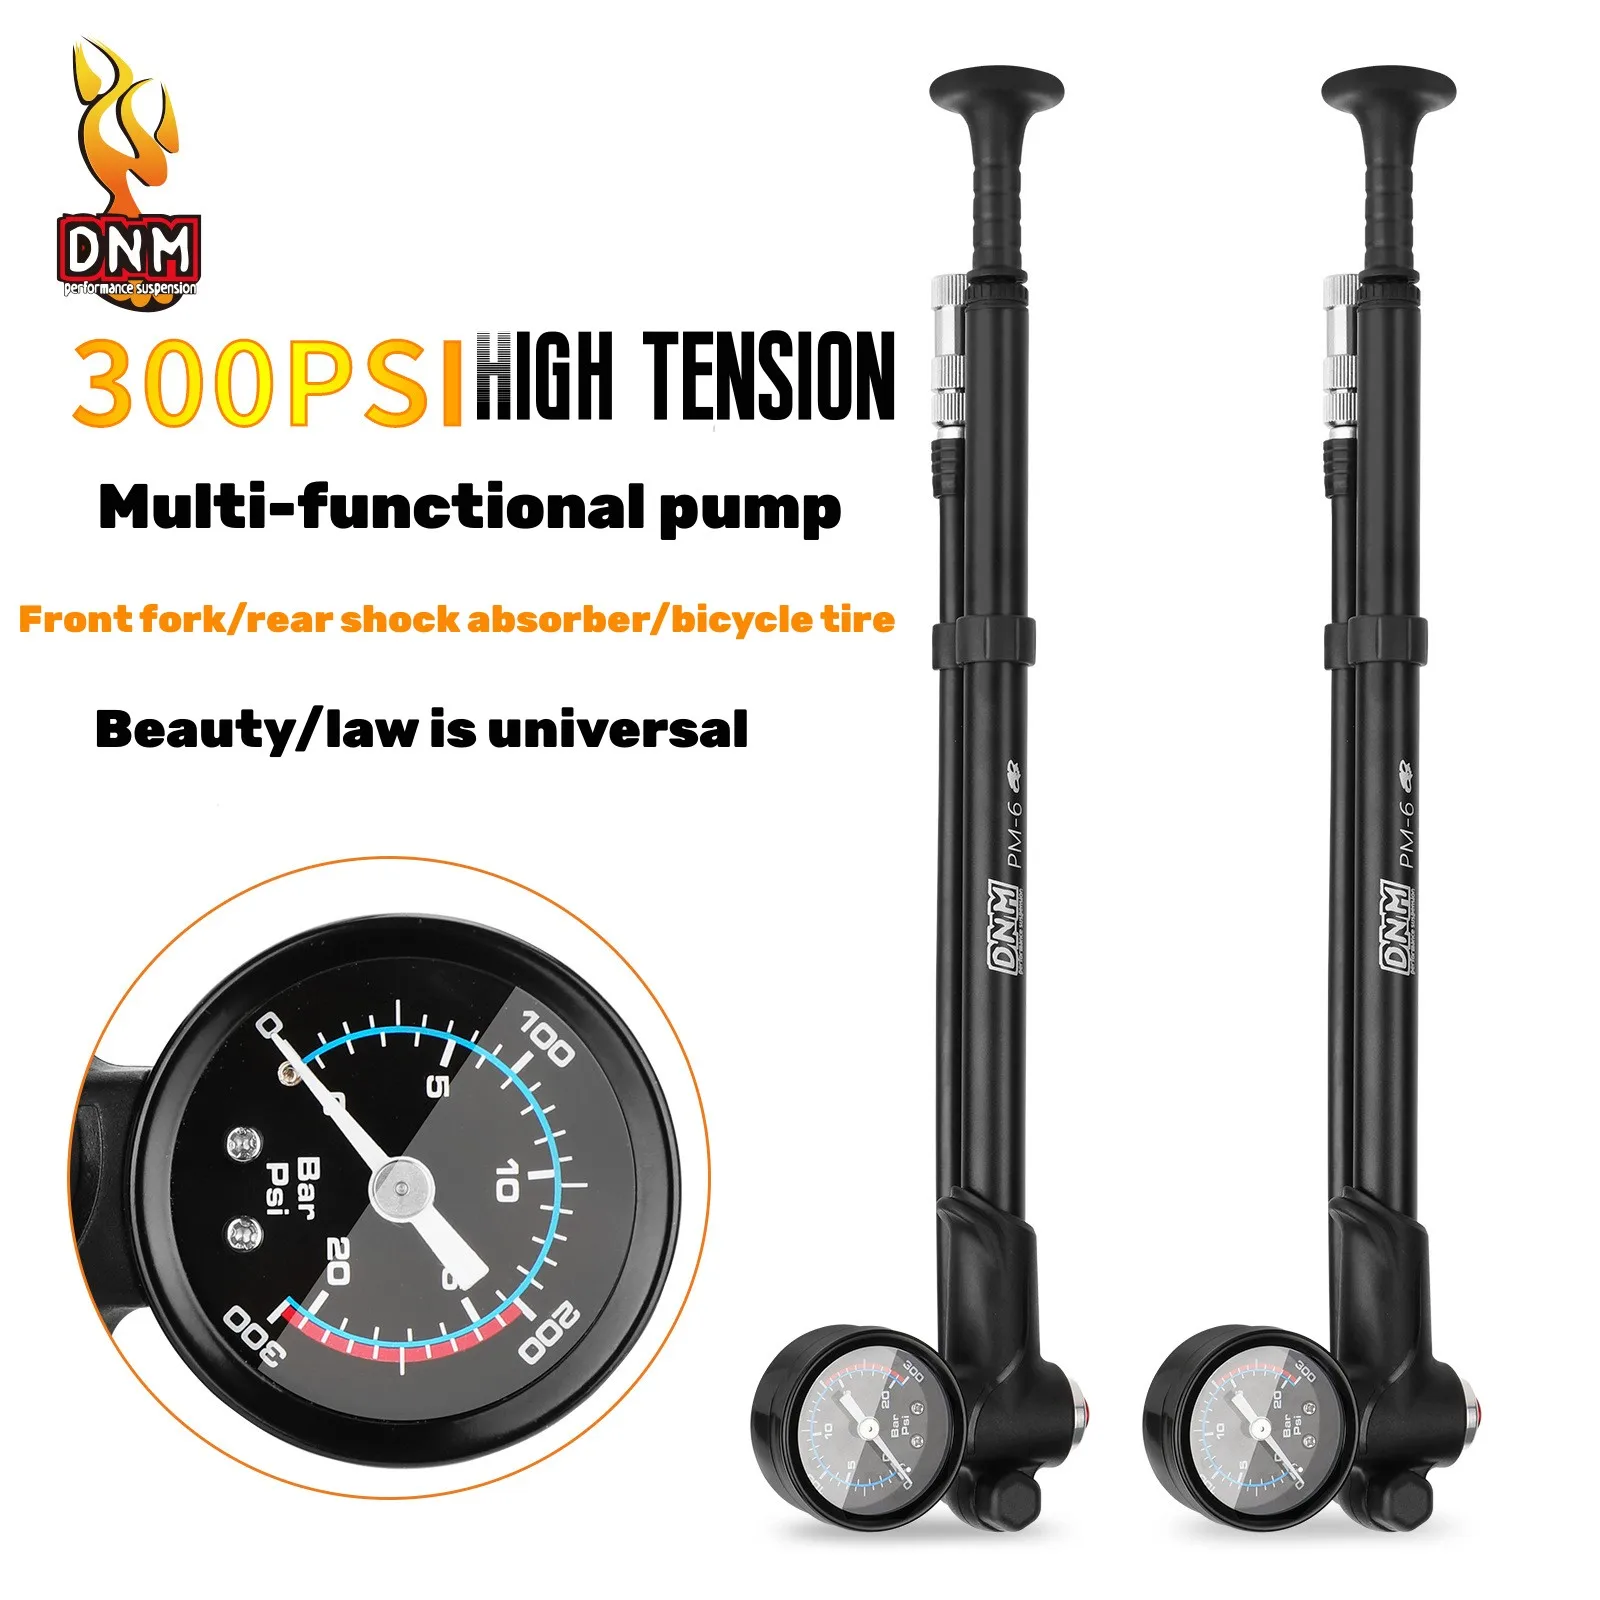 

DNM Portable High-pressure 300psi Road Bike Air Pump with Gauge for Fork & Rear Suspension Shock Absorber Mountain Bicycle Pump